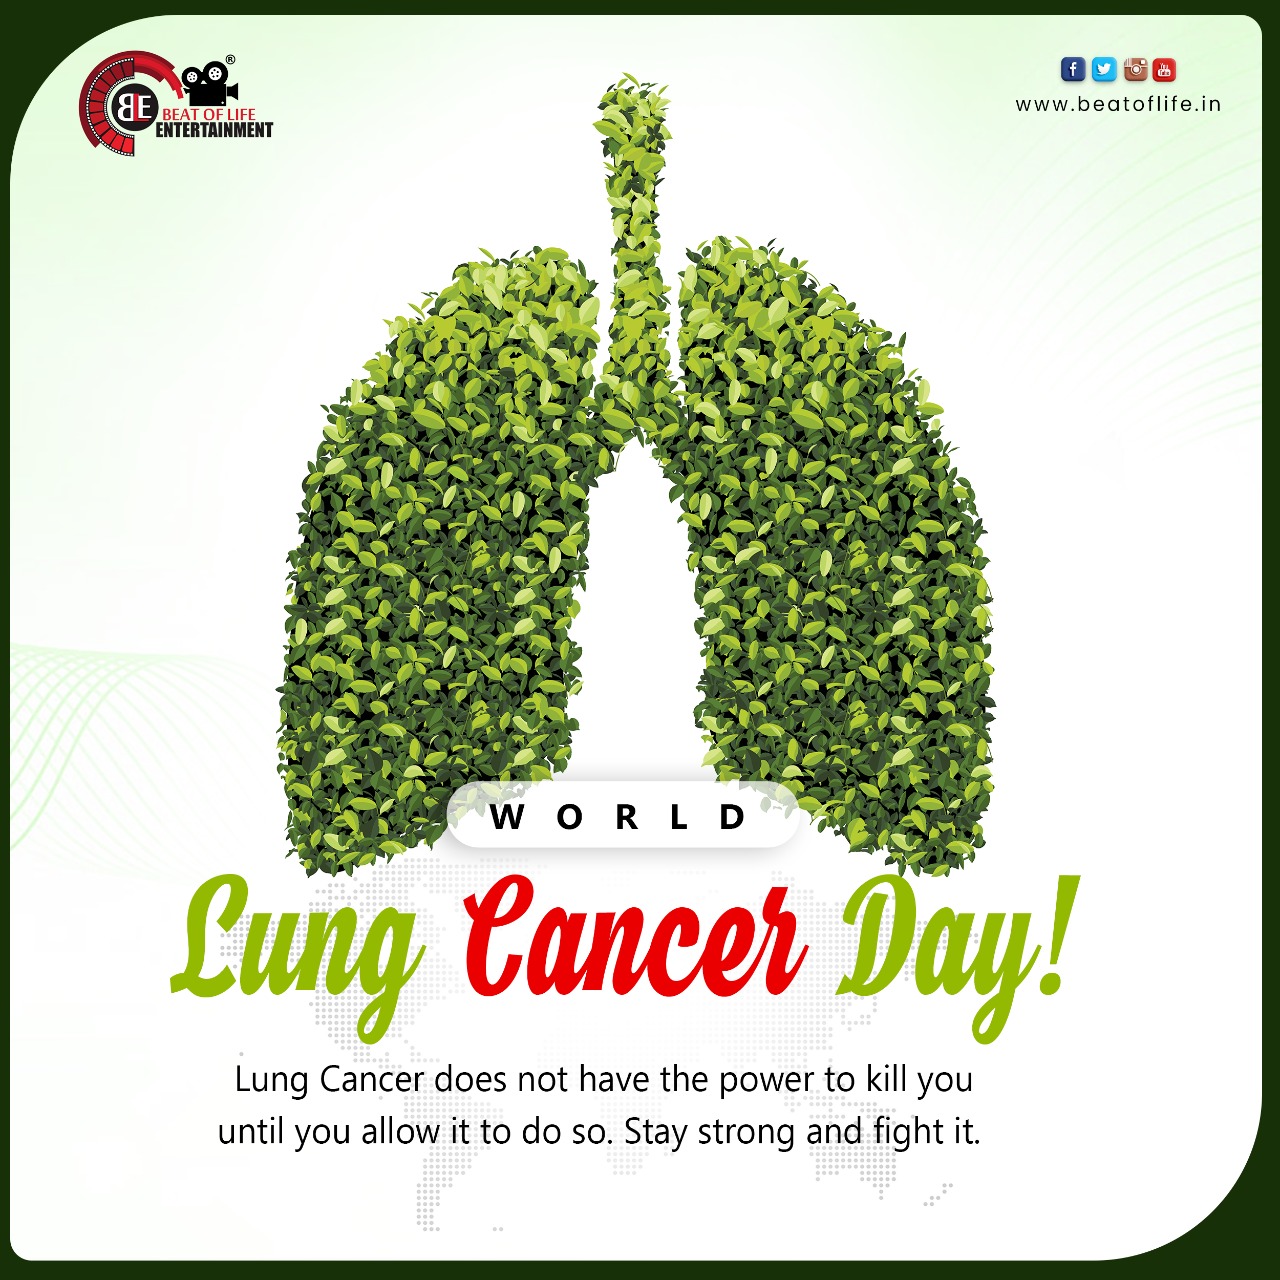 World Lung Cancer Day Wishes - Beat of Life Entertainment